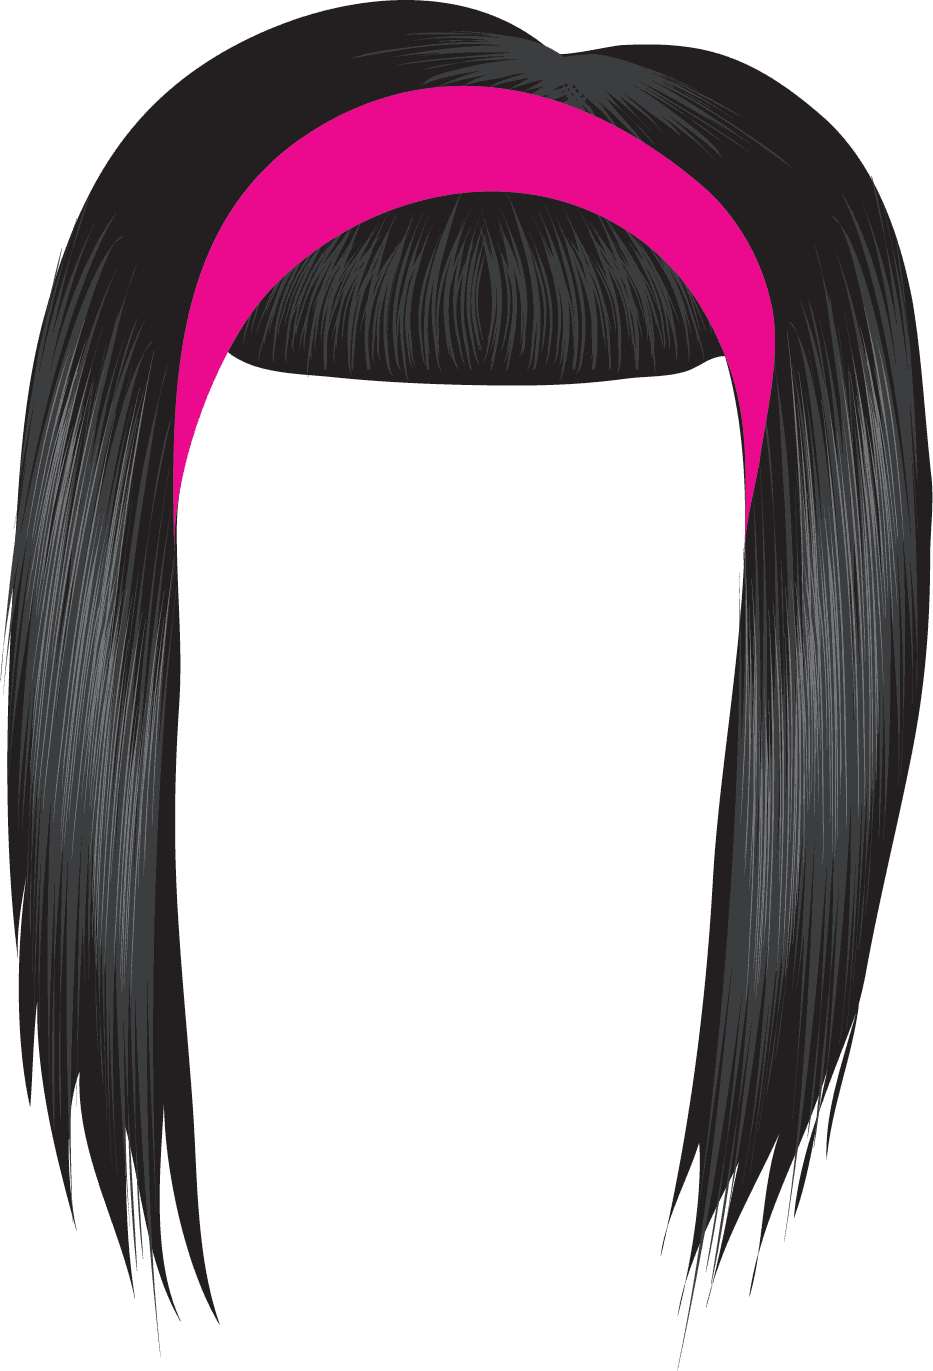 Black hair clipart free images